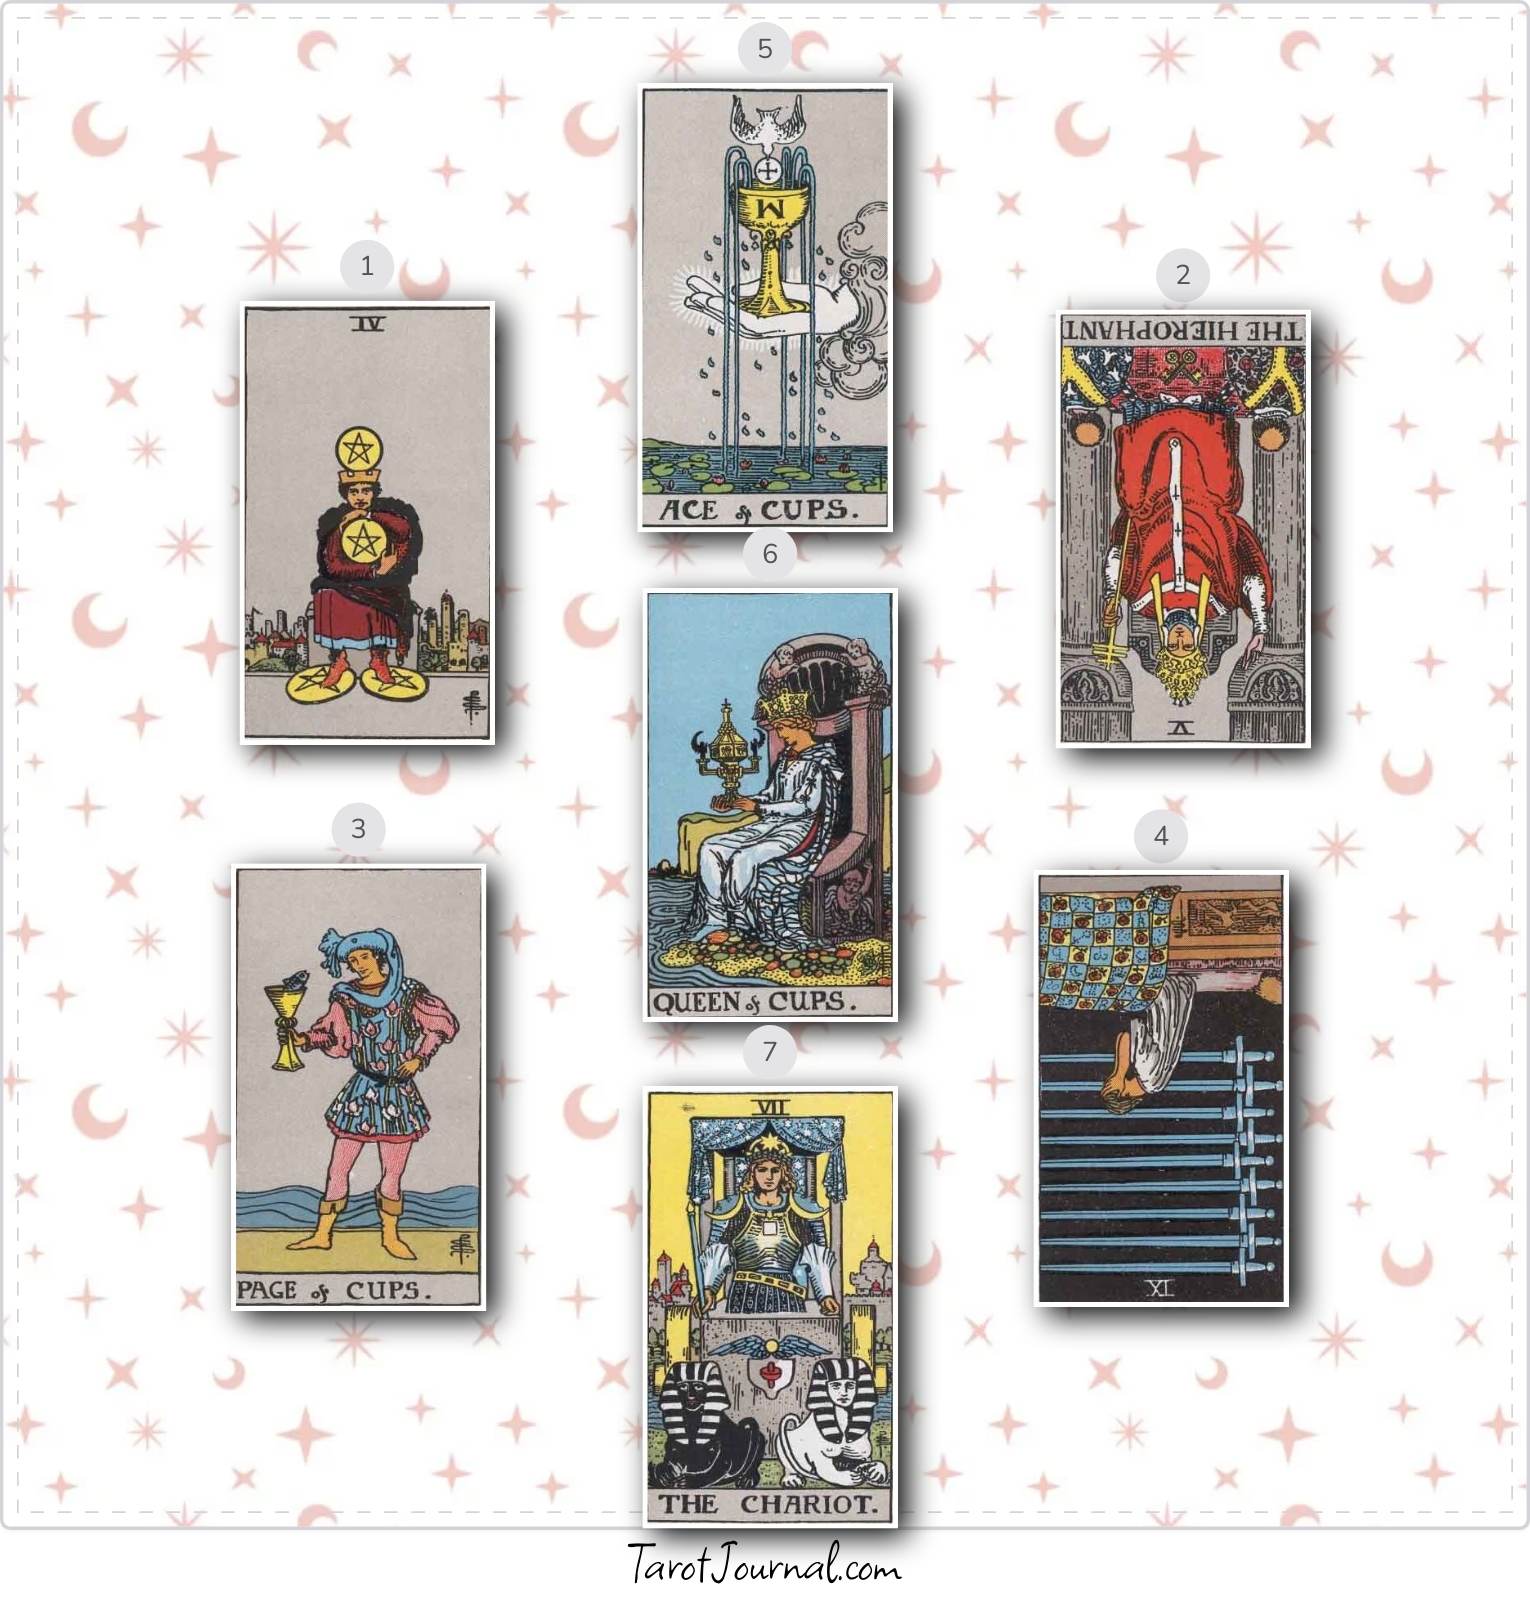 Will my ex (most recent breakup) and I get back together - tarot reading by Mariam